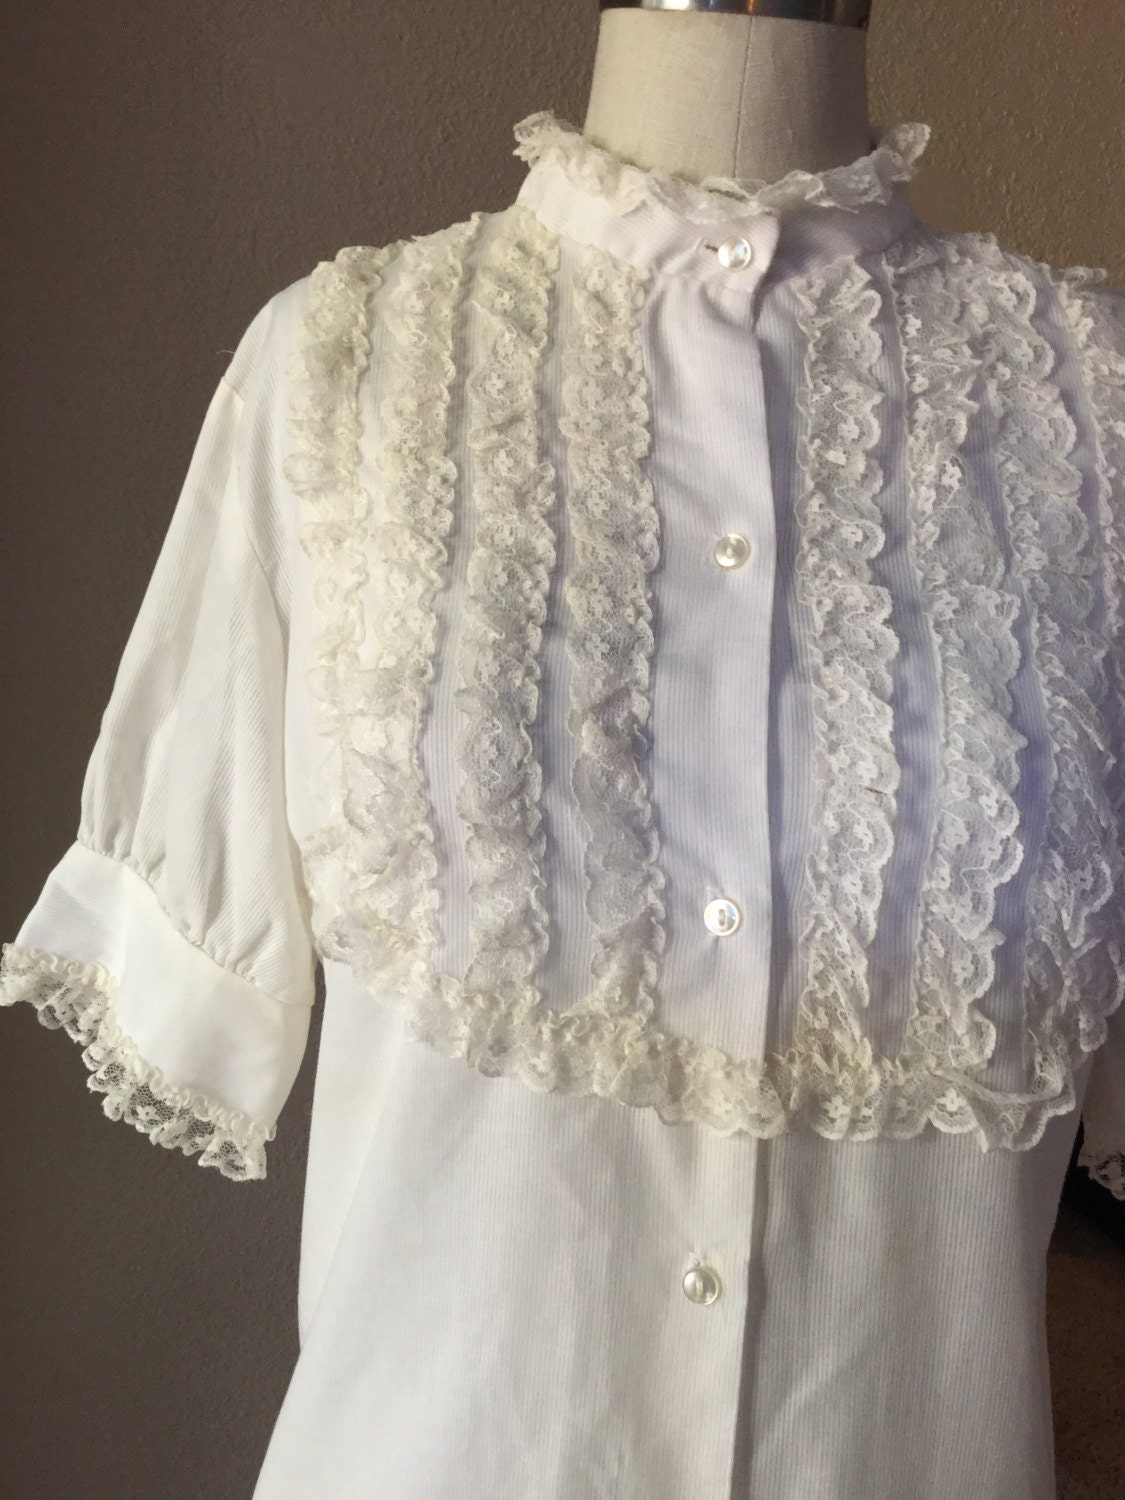 Hollywood White Lace Blouse 50's White Designer CA Top | Etsy